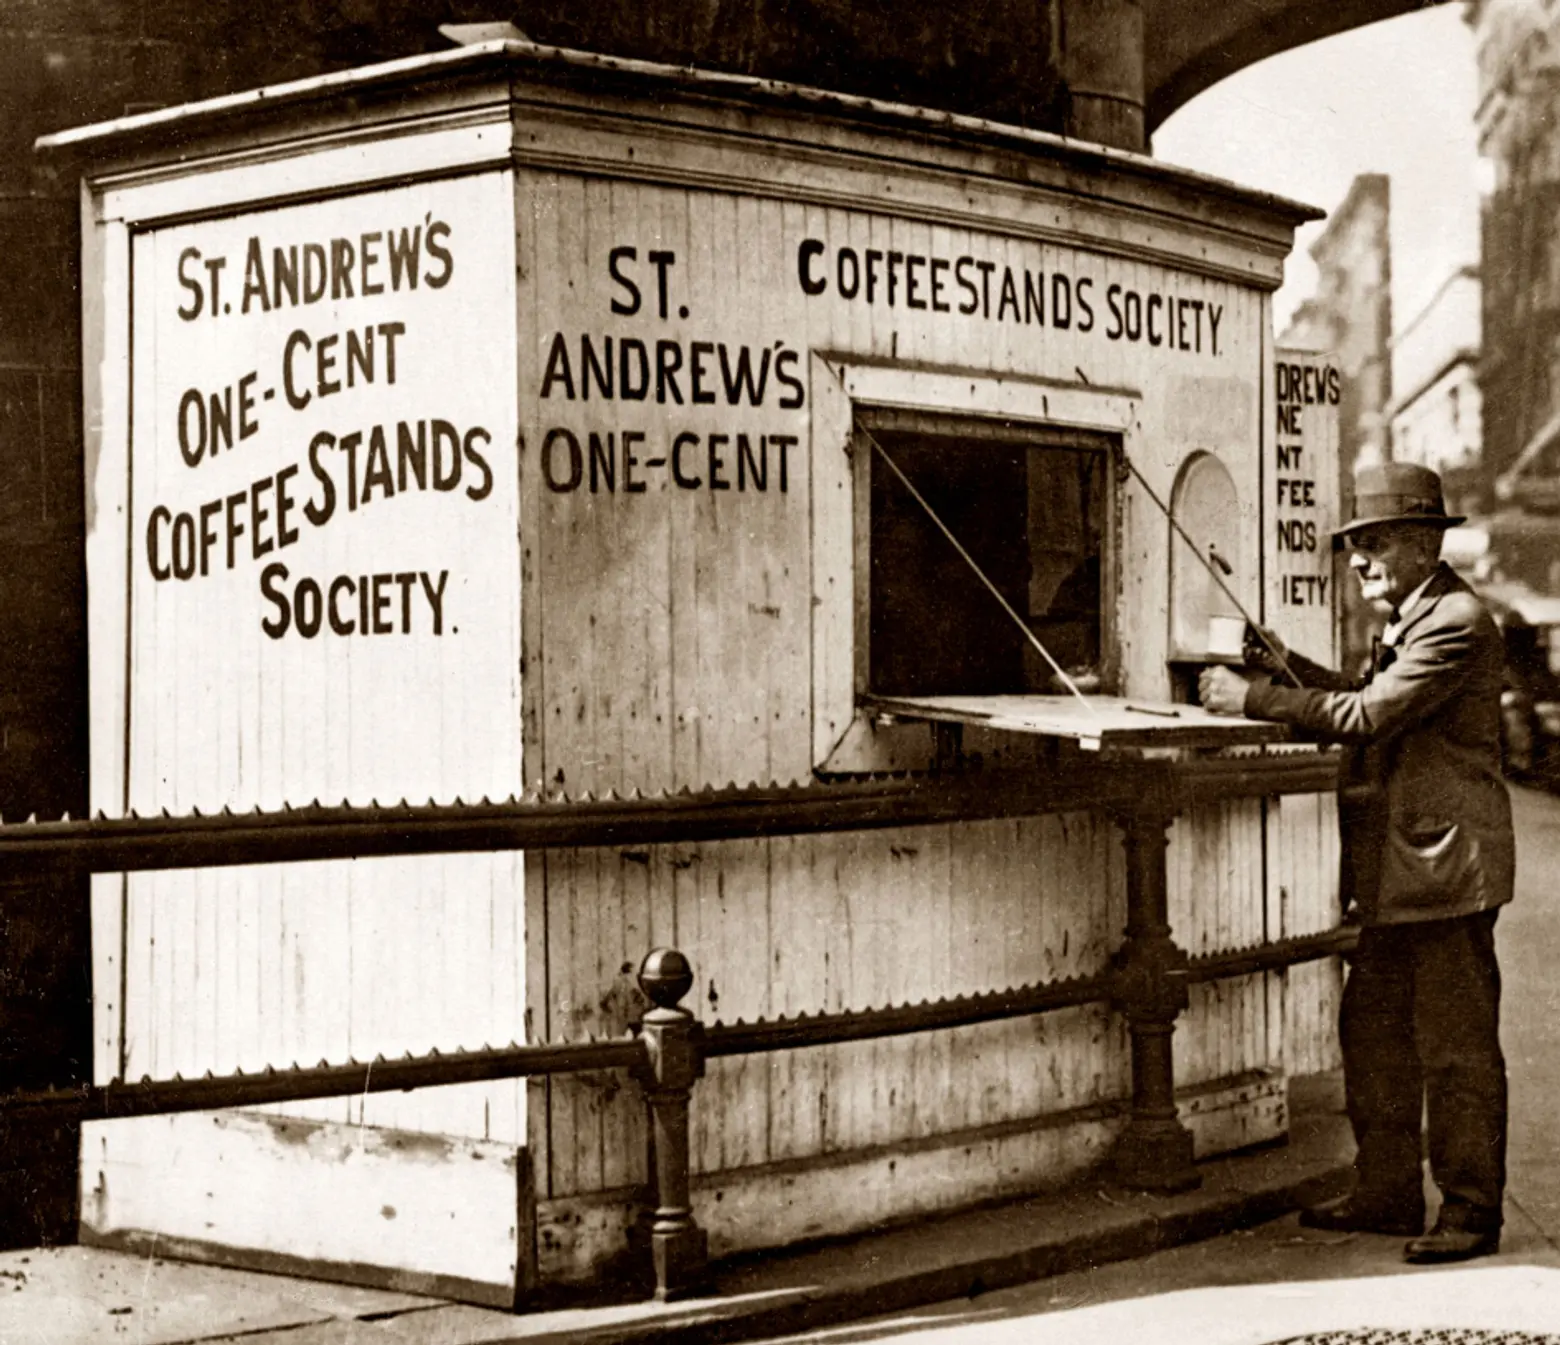 St. Andrews One Cent Coffee Stand, Clementine Lamadrid, Frank Leslie's Sunday Magazine